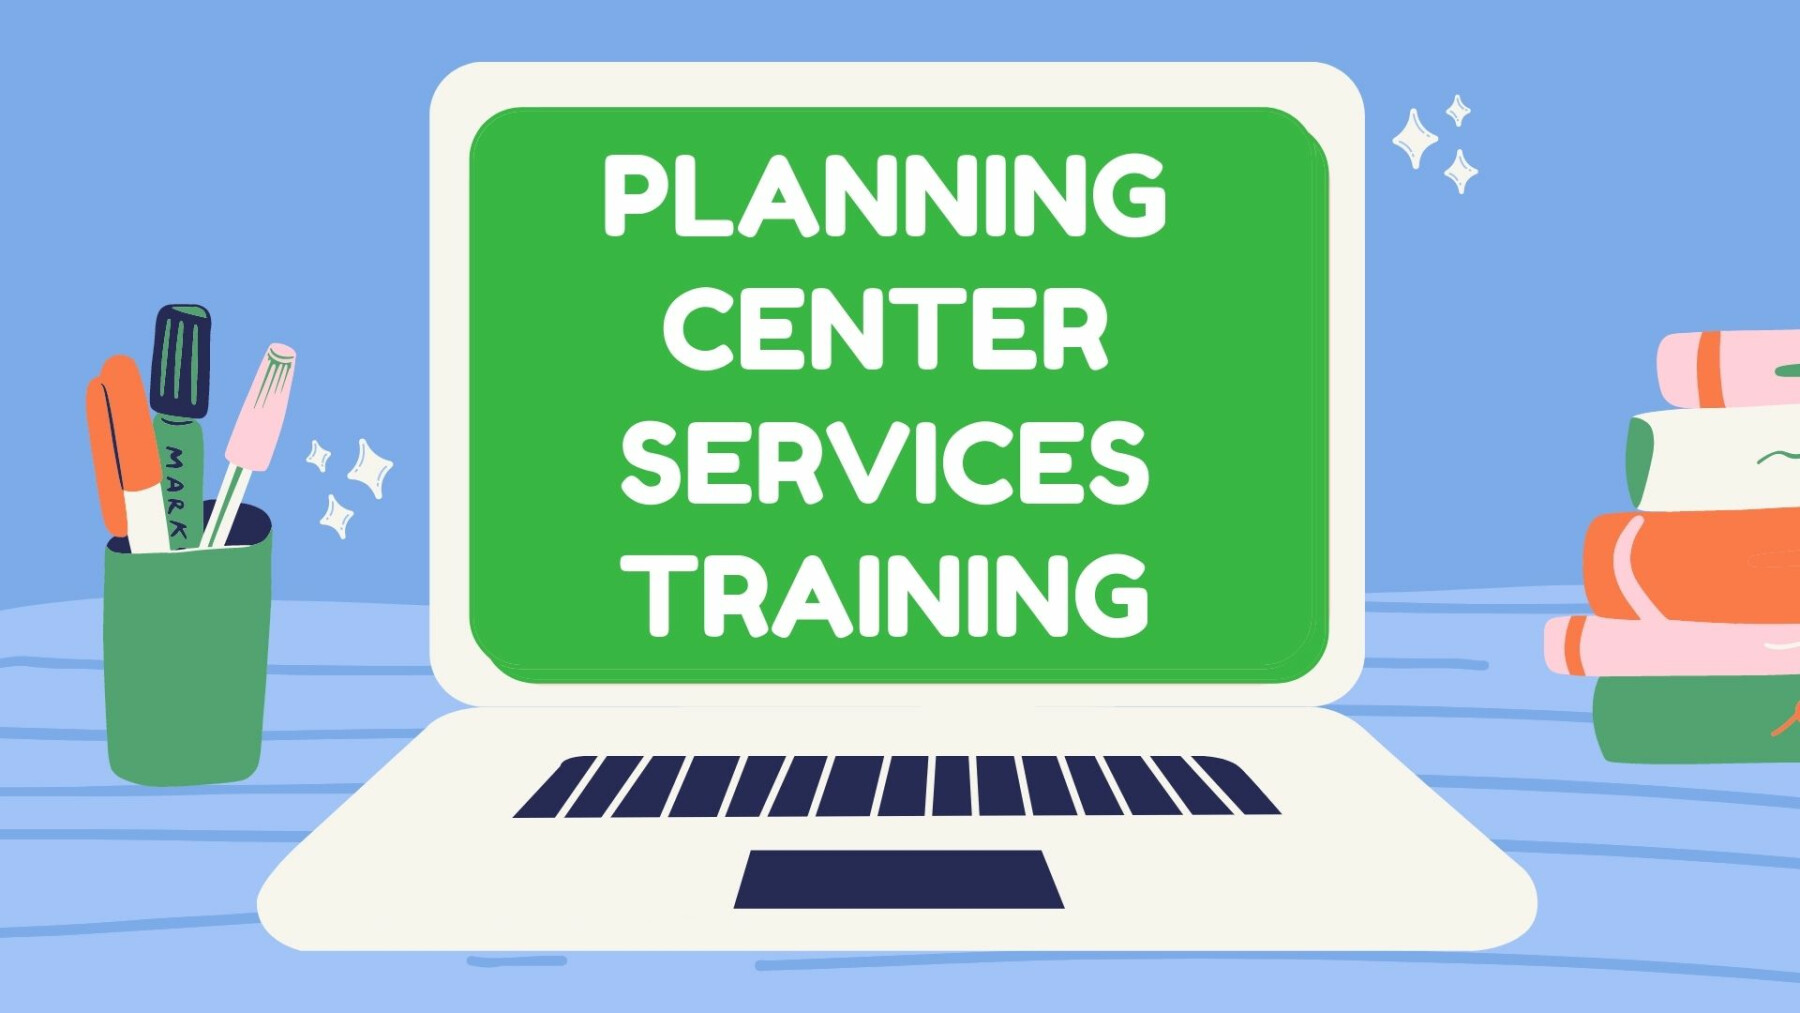 Planning Center Services Training for Liturgical Ministers